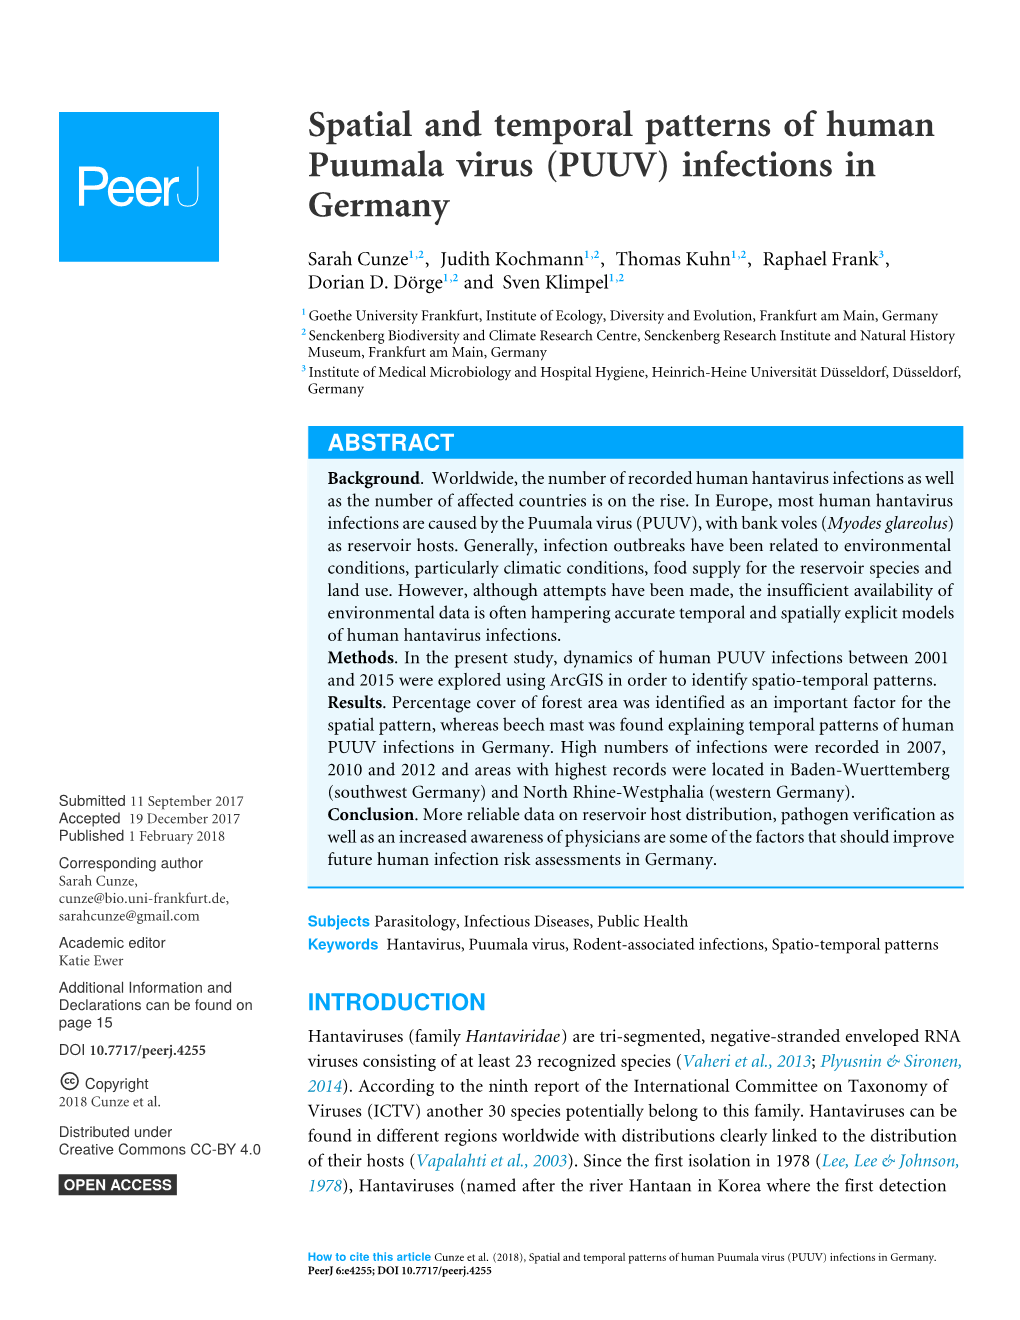 Spatial and Temporal Patterns of Human Puumala Virus (PUUV) Infections in Germany